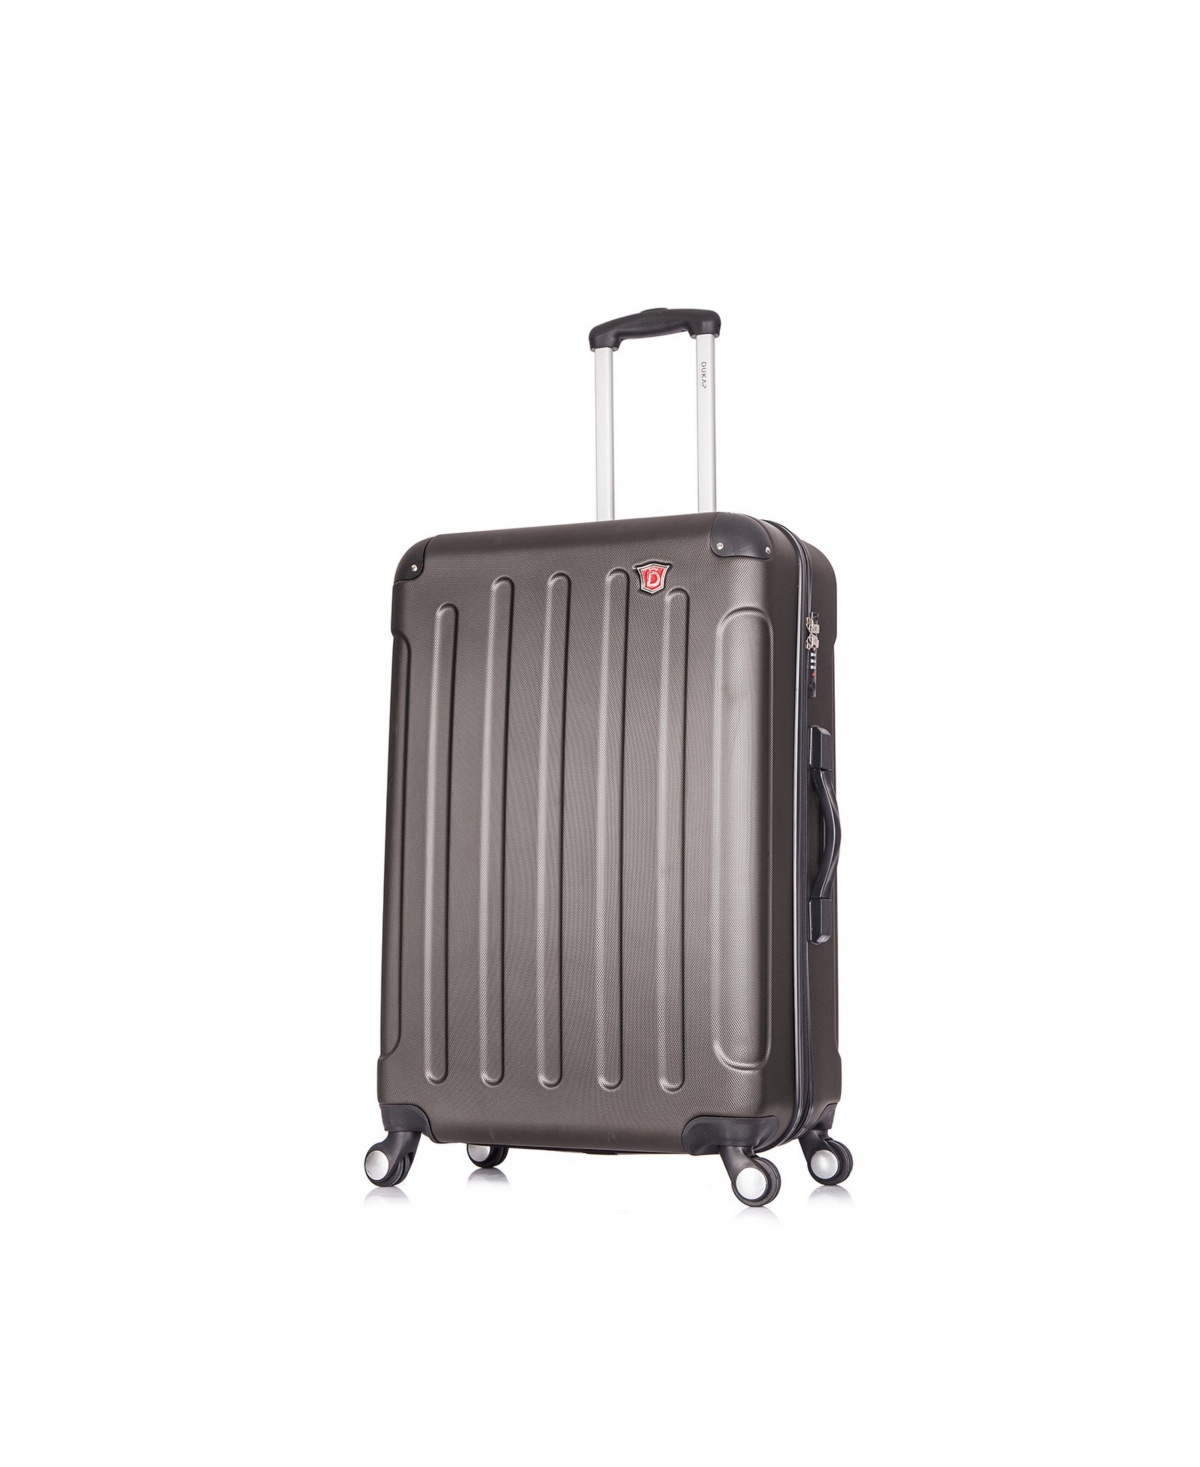 Intely 28" Hardside Spinner Luggage With Integrated Weight Scale - Grey